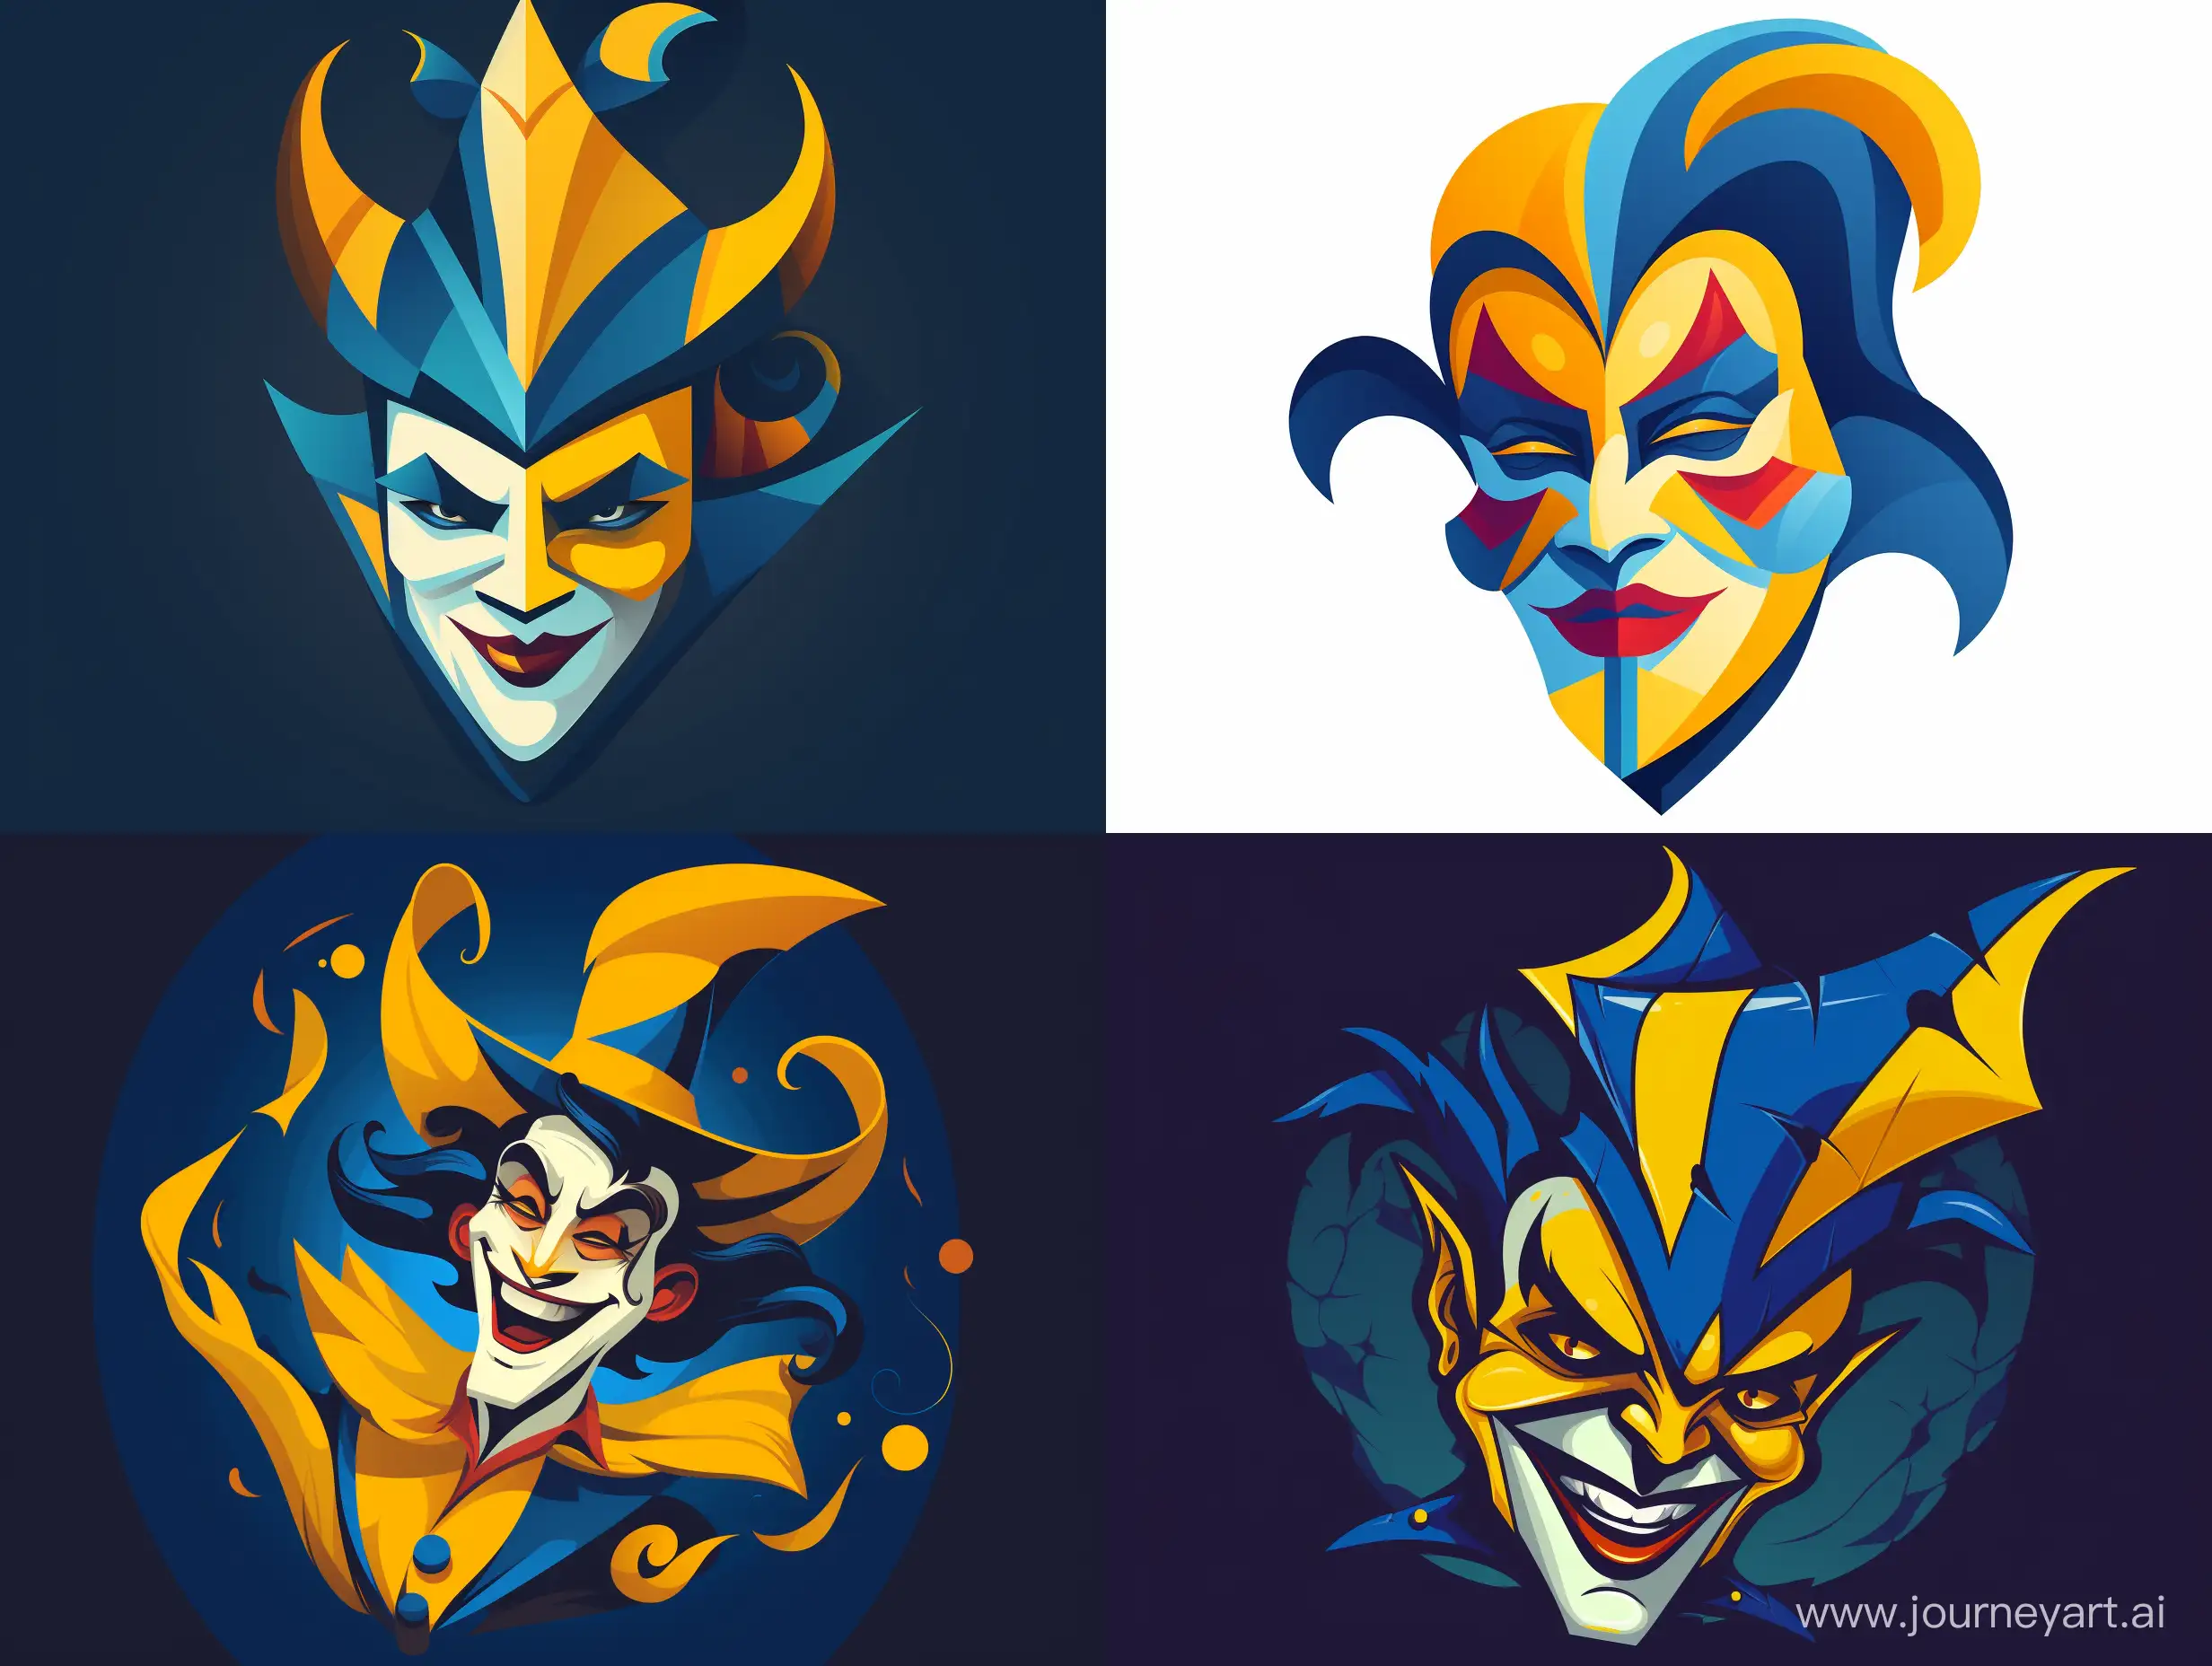 Whimsical-Jester-Logo-in-Vibrant-Blue-and-Yellow